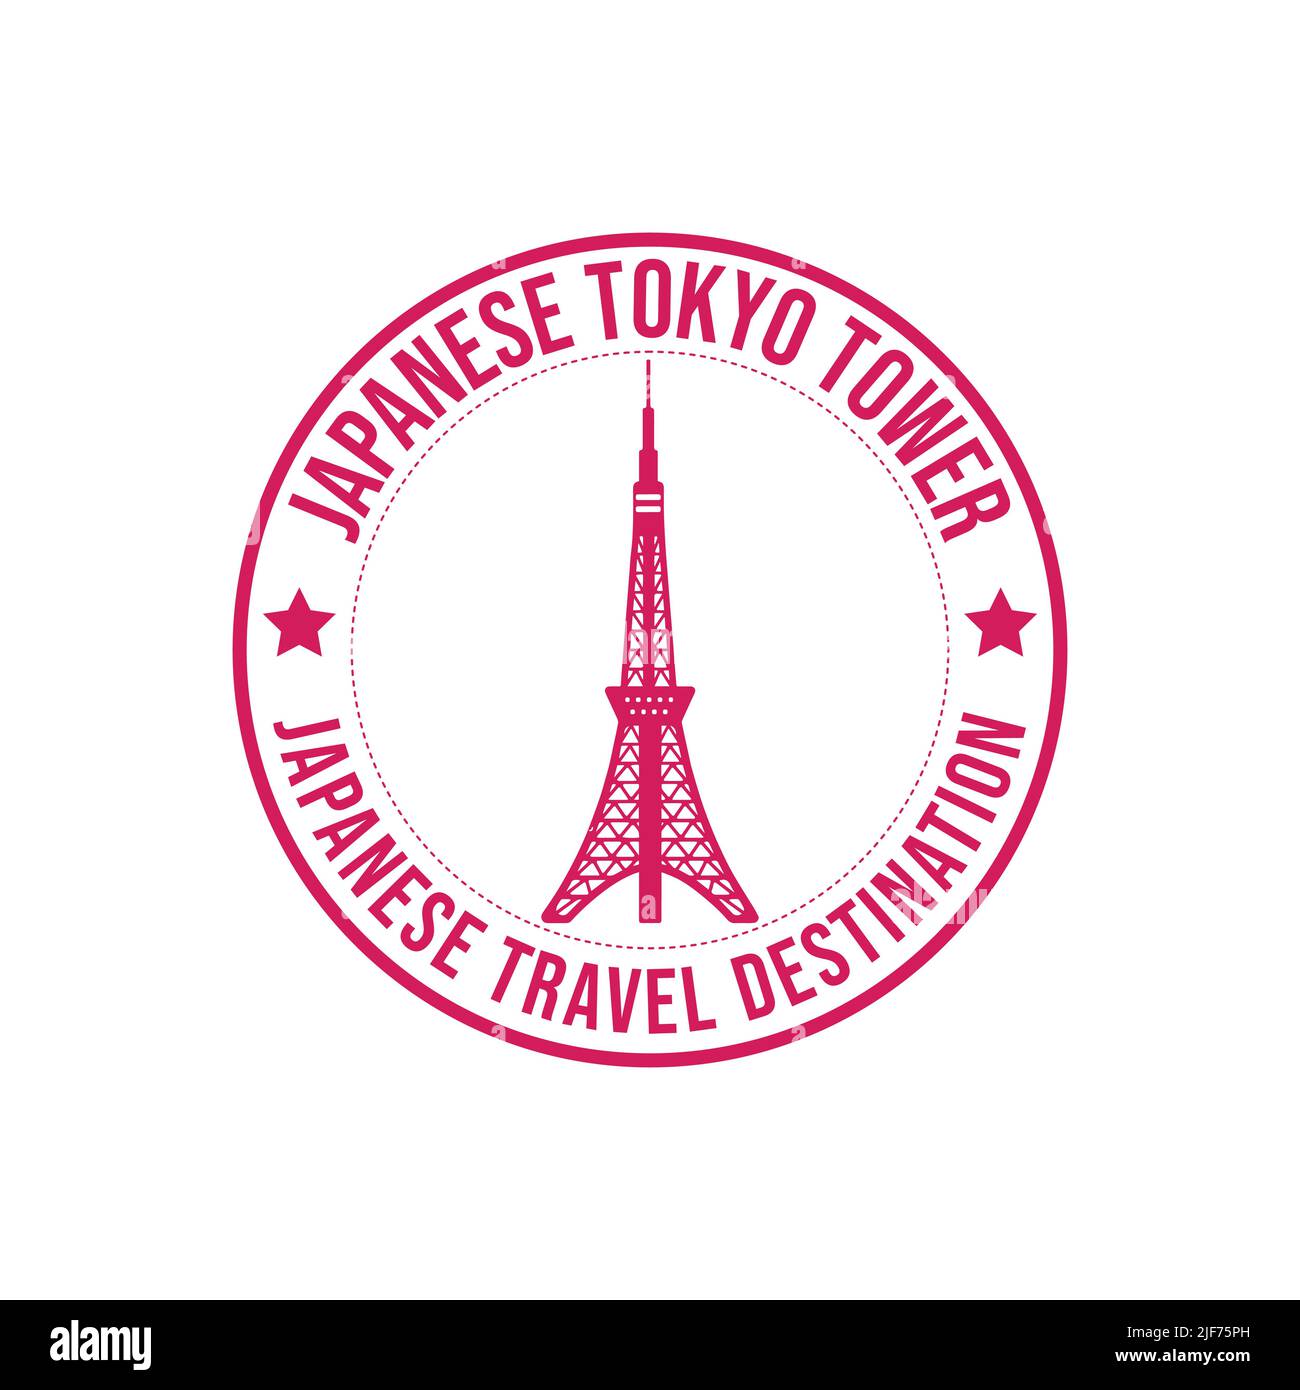 Circle rubber stamp with the Japanese Tokyo tower travel destination written inside the stamp. Japanese modern tower architecture. Japanese travel des Stock Vector